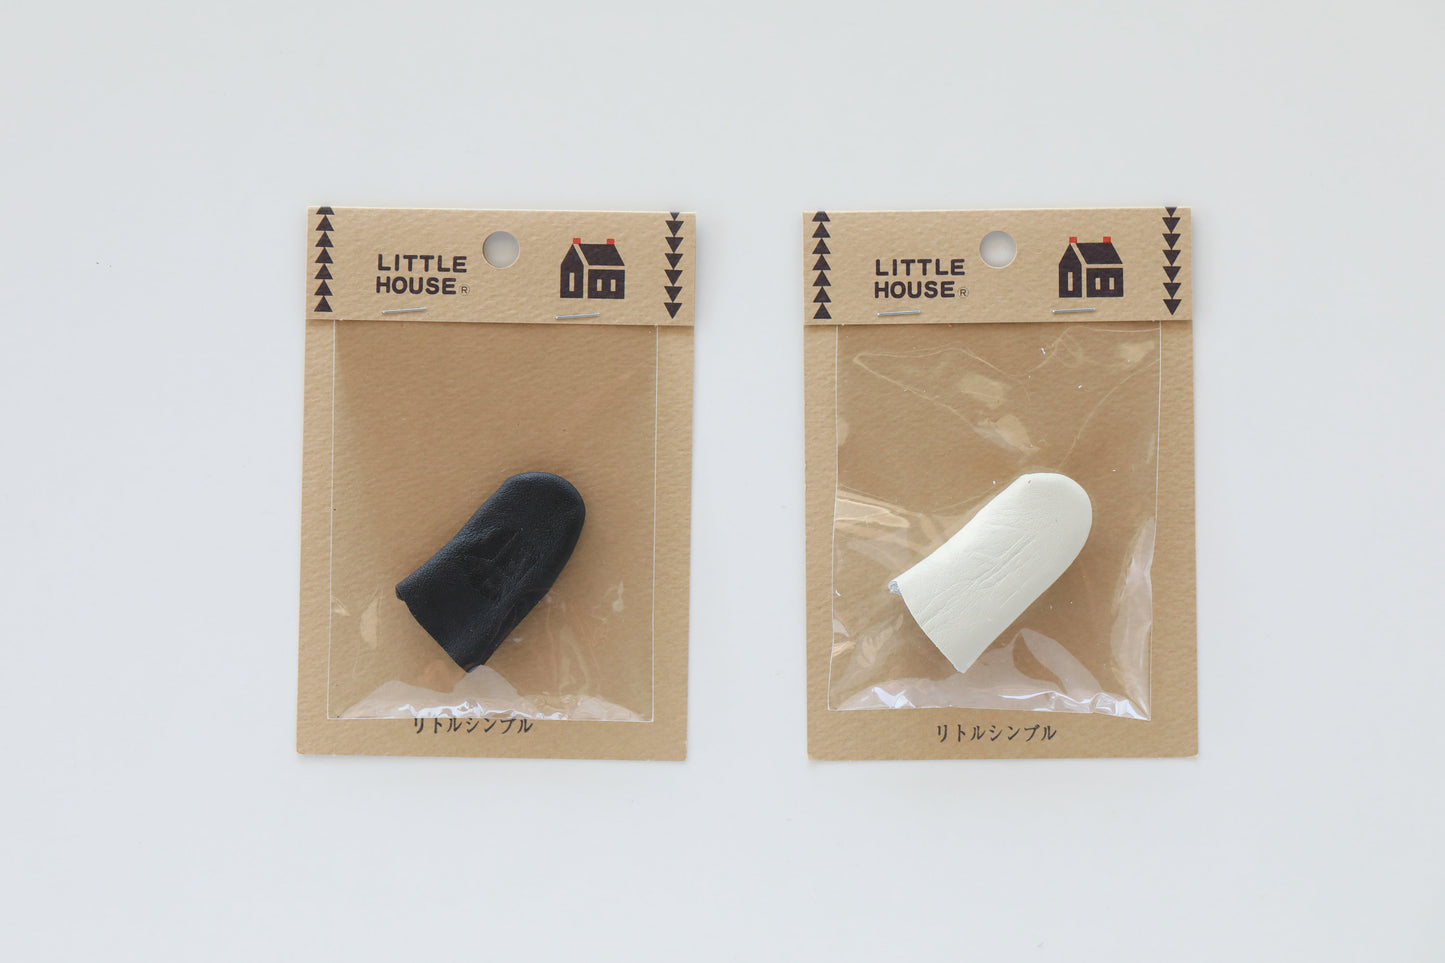 Little House leather fingertip sewing thimbles in black or white